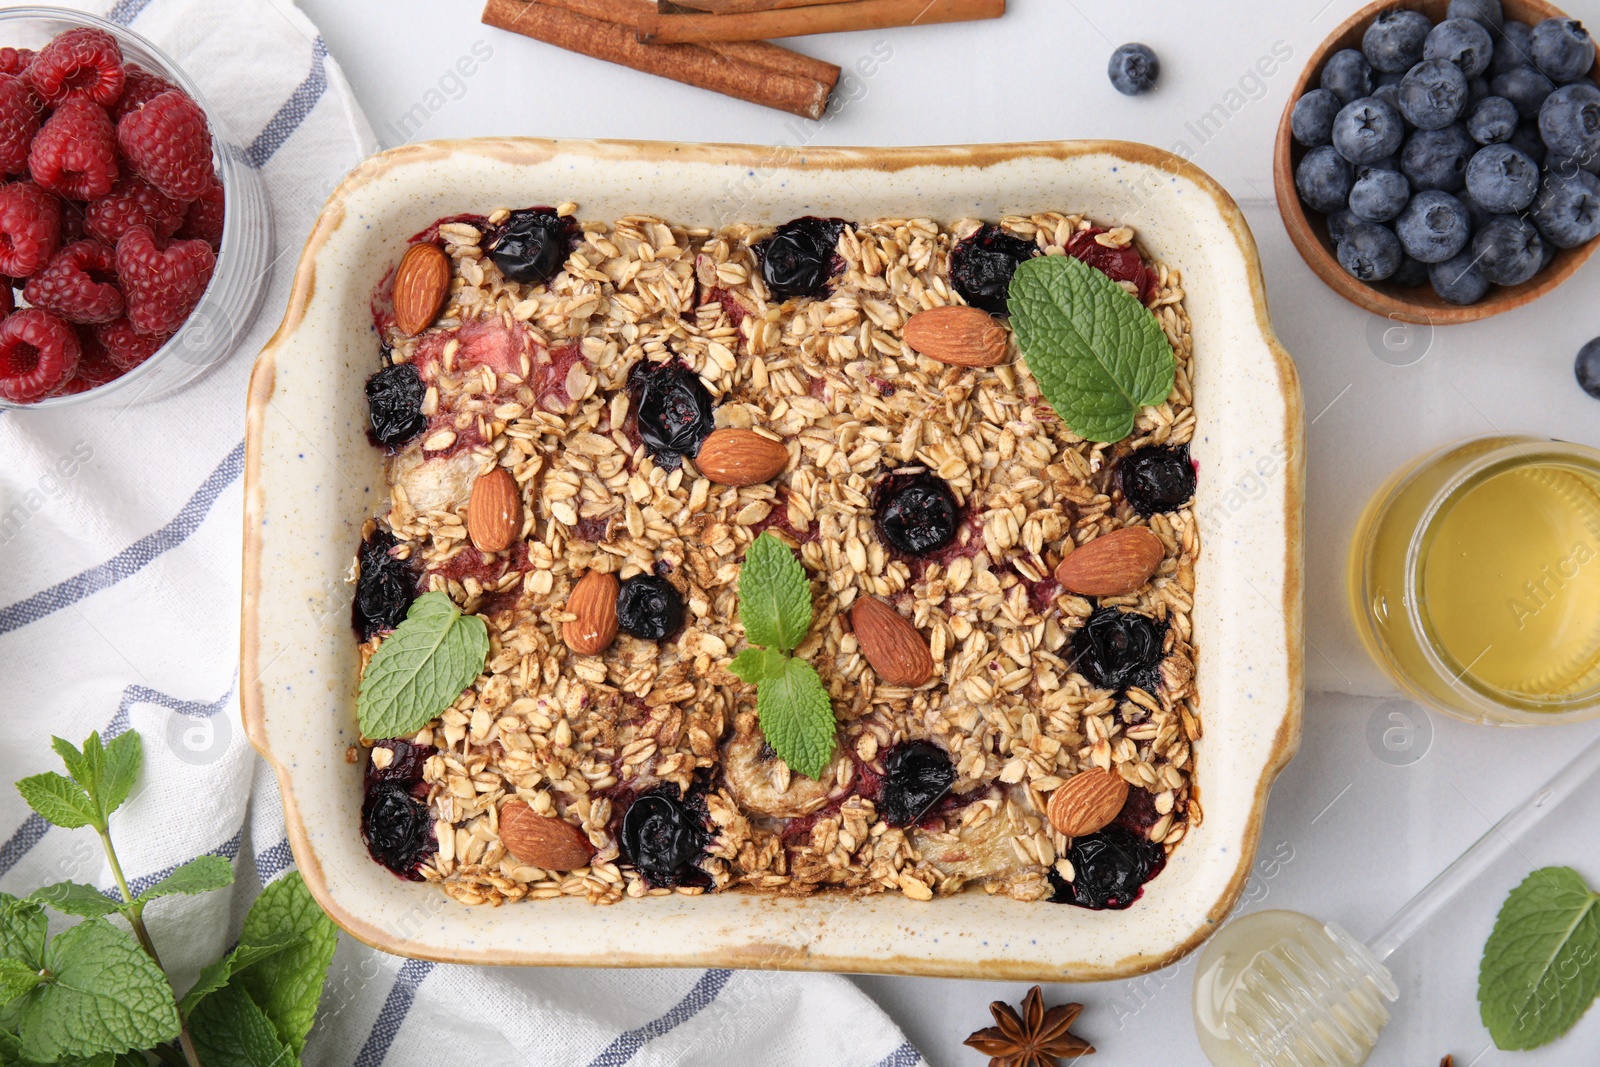 Photo of Tasty baked oatmeal with berries, almonds and spices in baking tray on white tiled table, flat lay